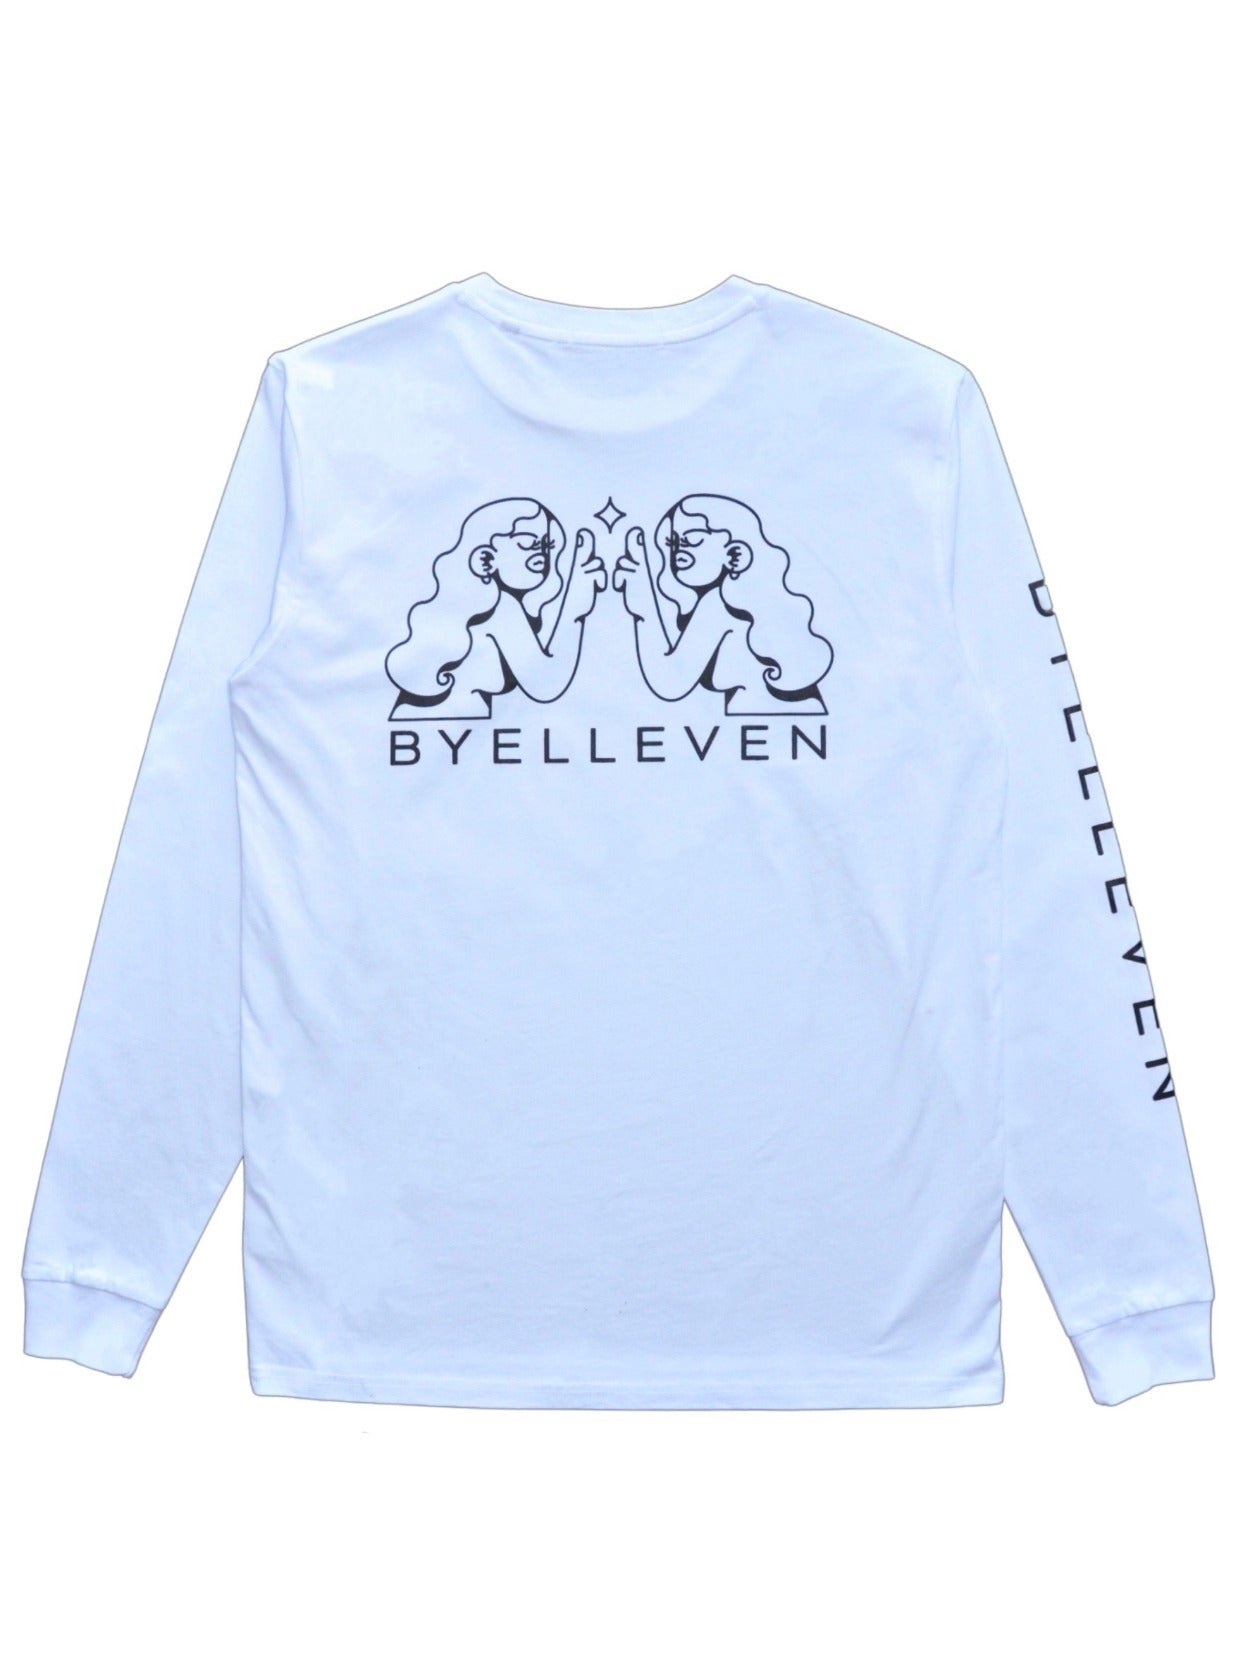 BY11 x Intangible Objects Organic Cotton L/S T-shirt - White